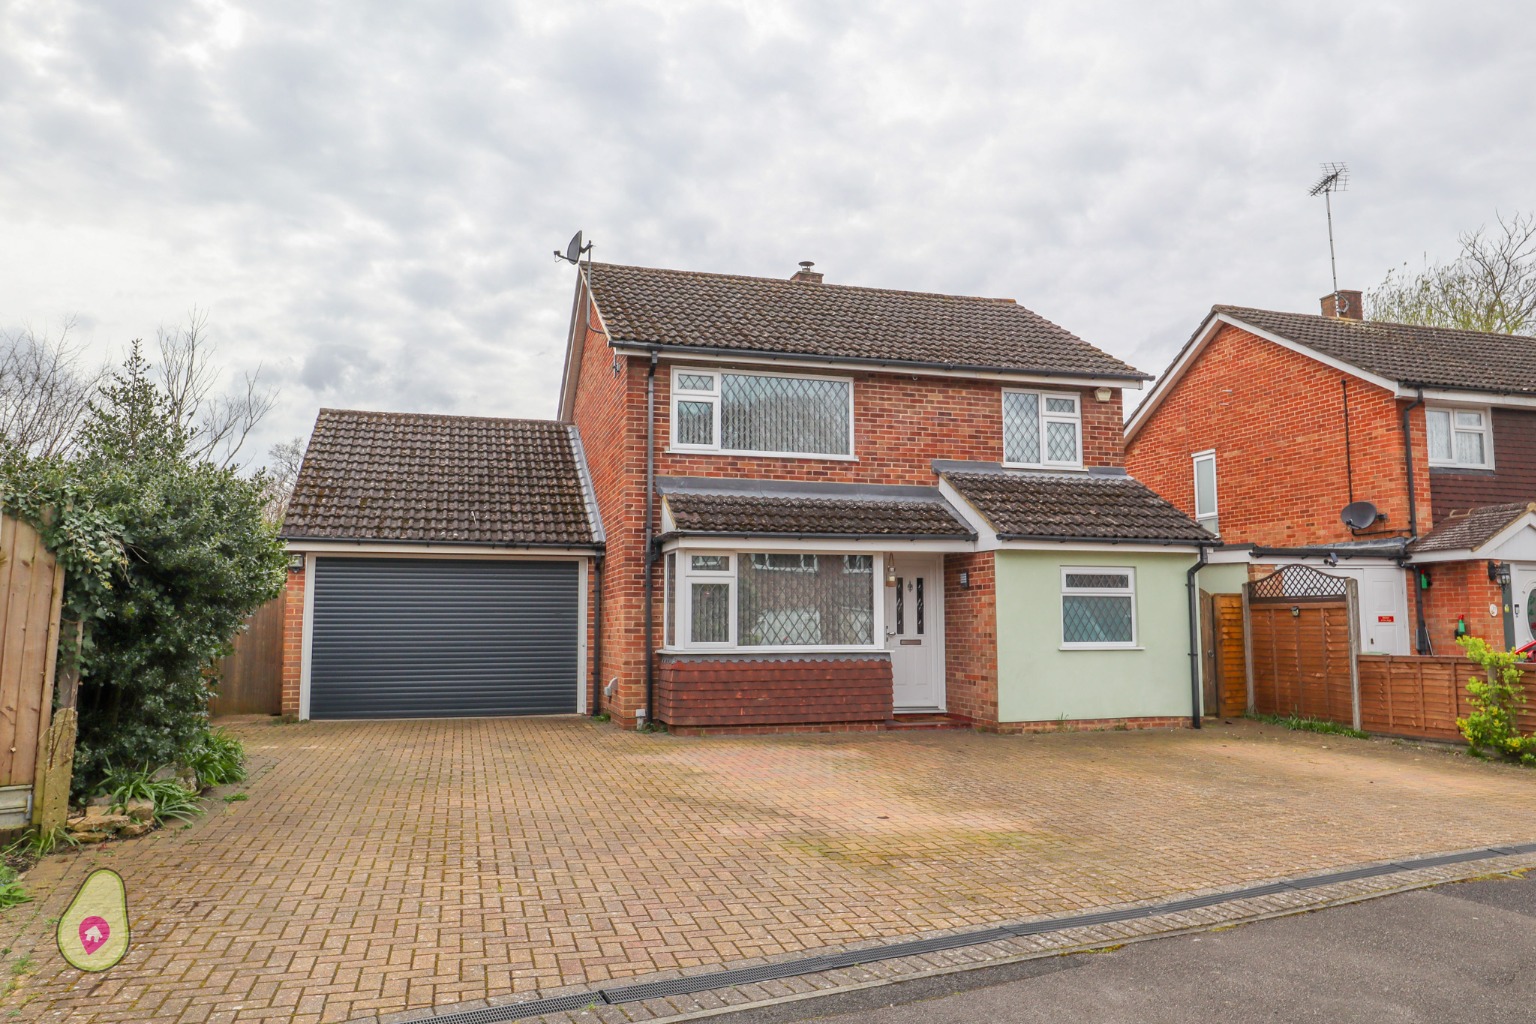 3 bed detached house for sale in Chestnut Road, Farnborough - Property Image 1